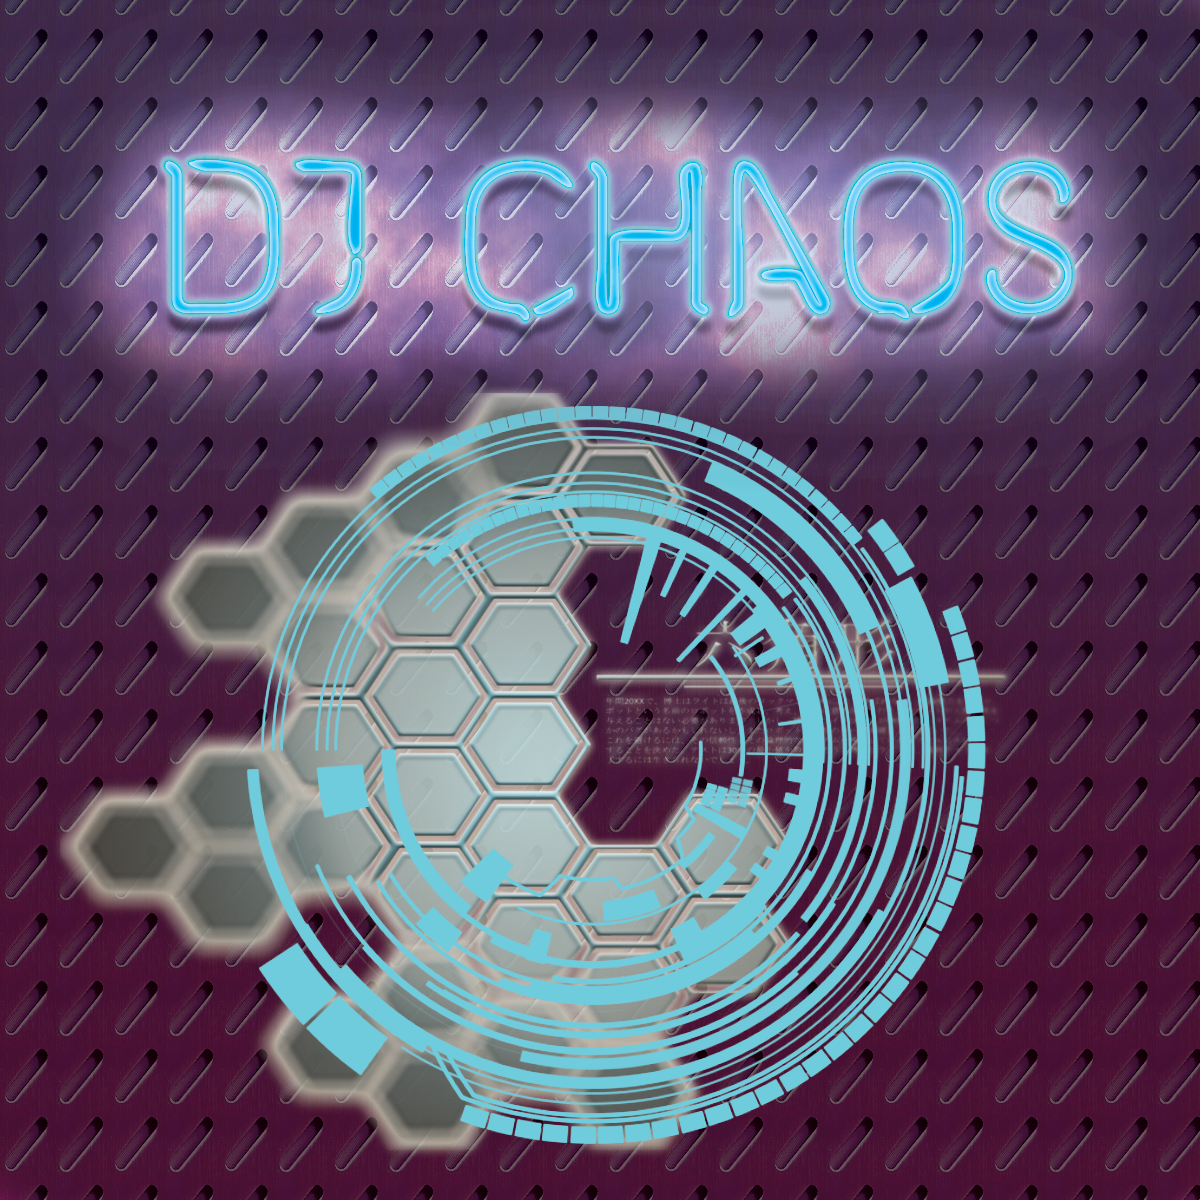 New Dj Logo and background by TimeToDie79 on DeviantArt